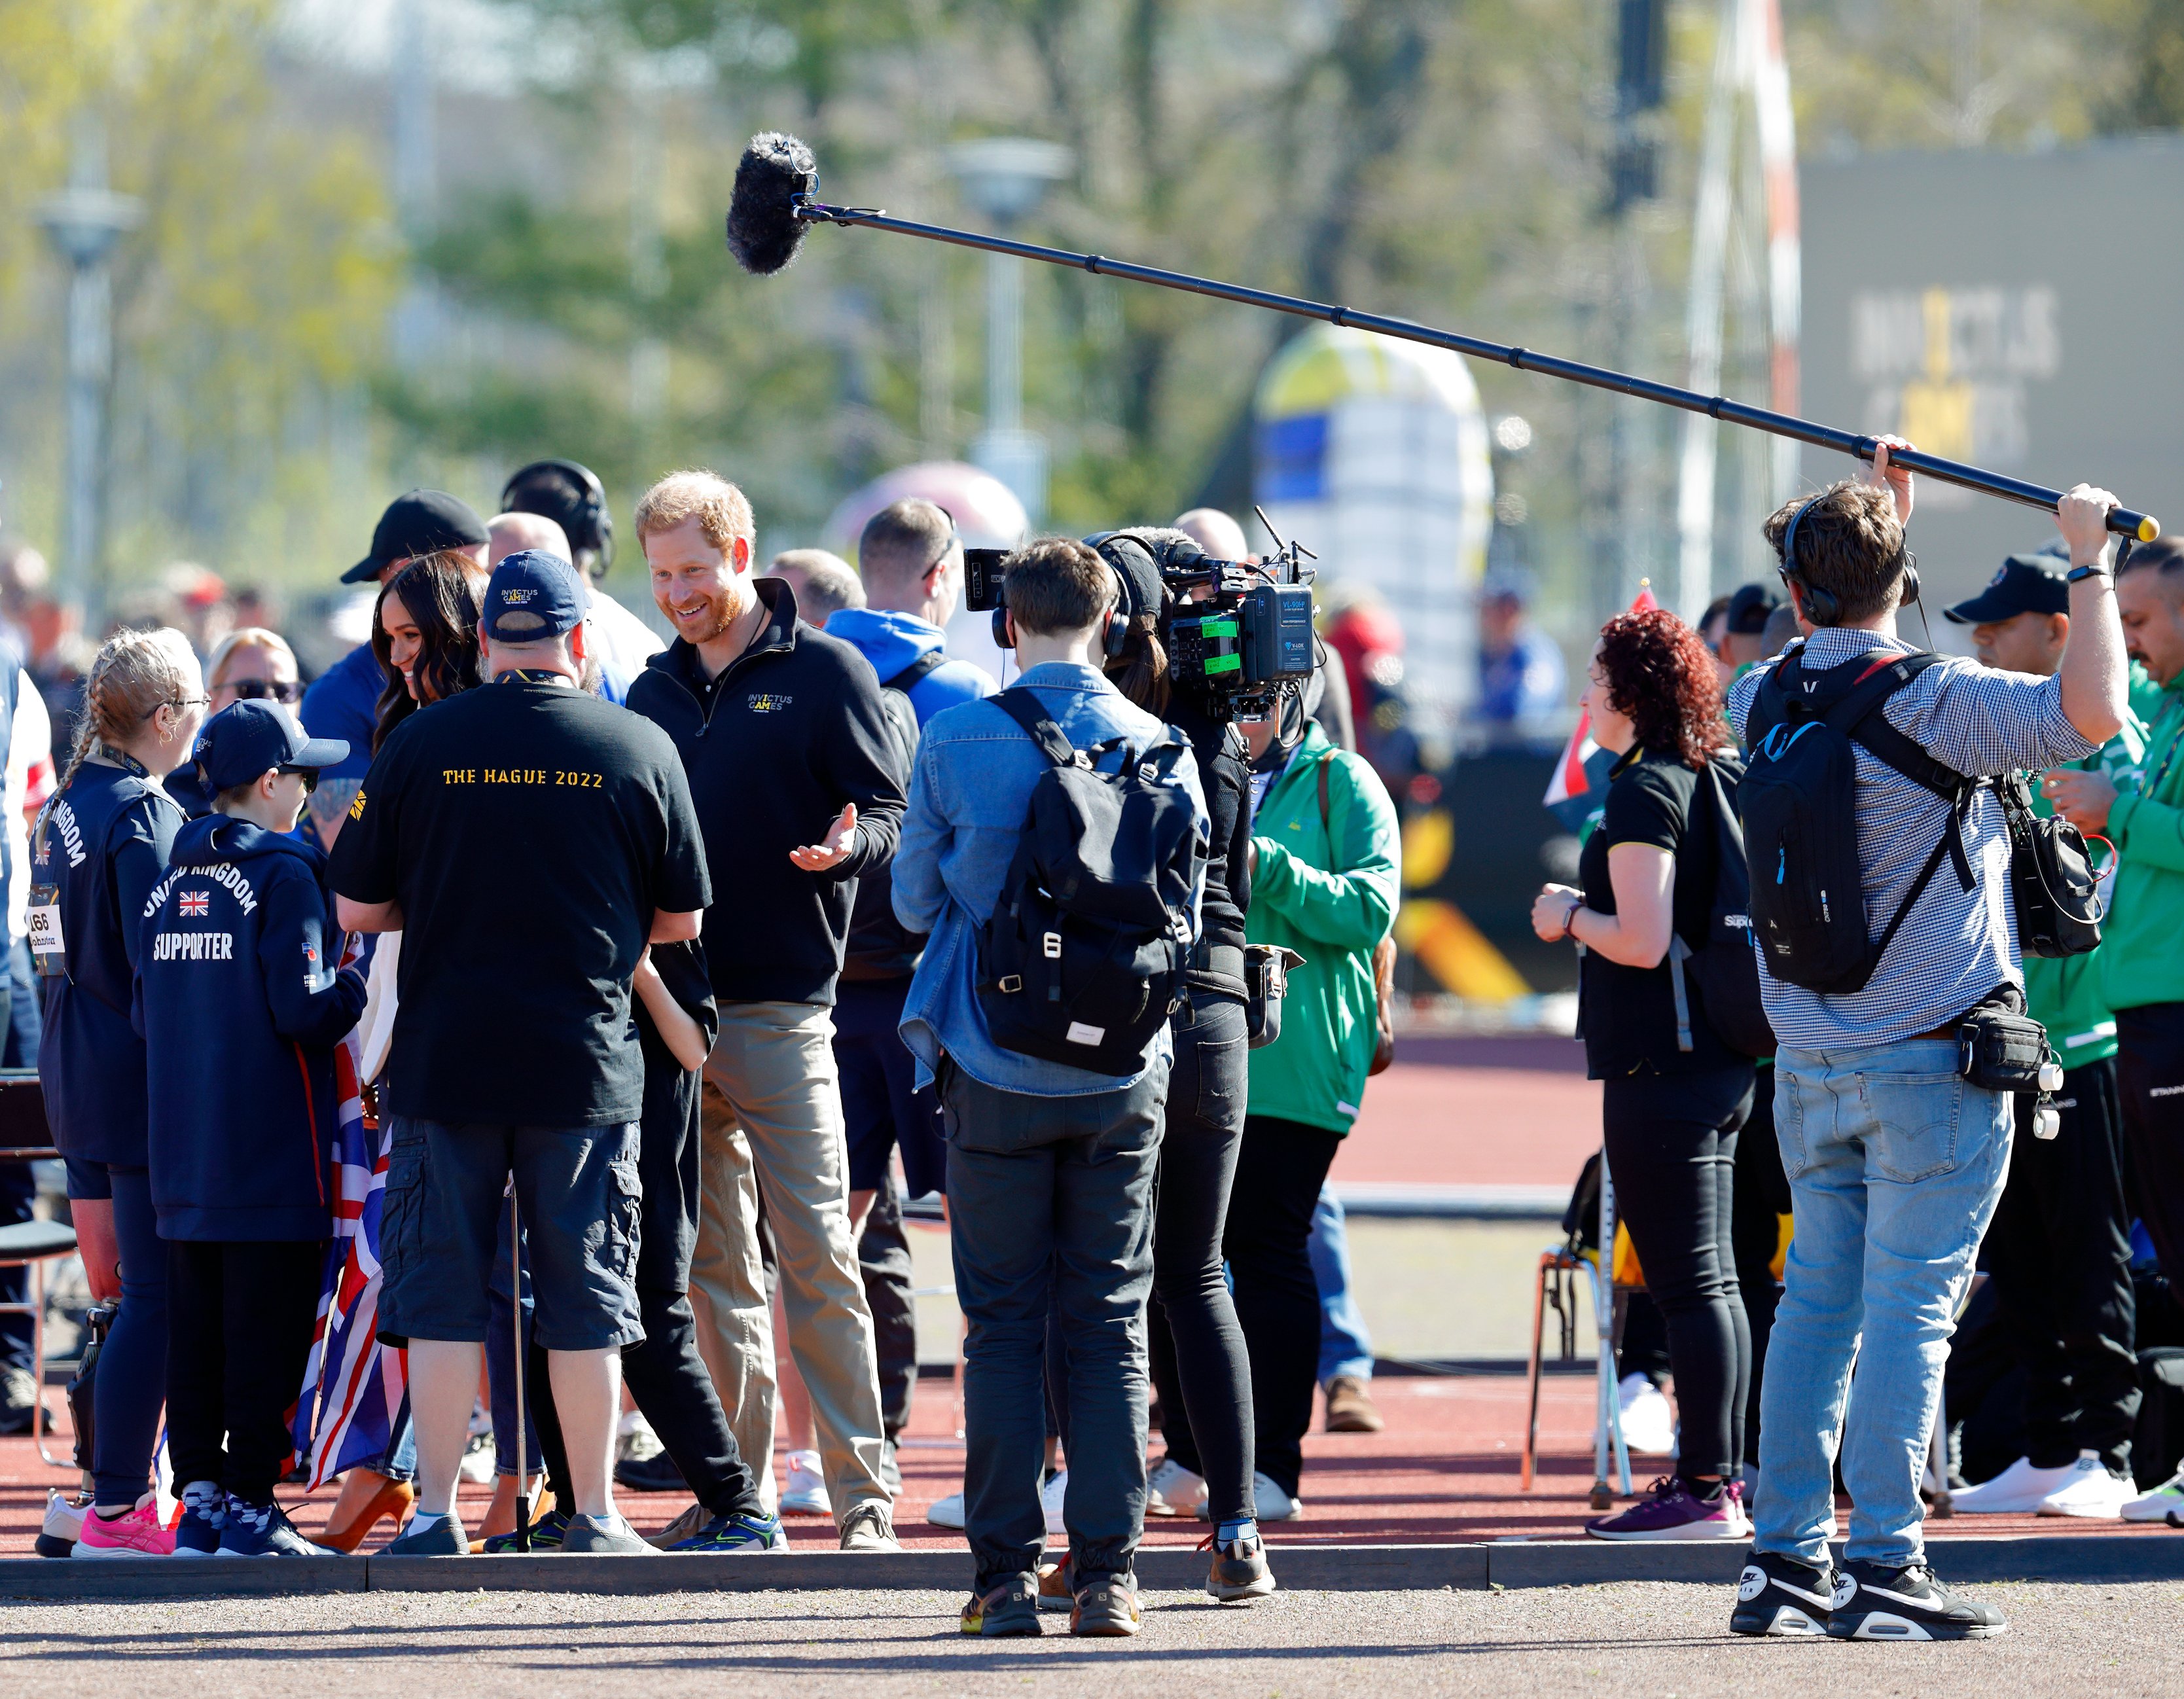 Meghan, Duchess of Sussex and Prince Harry, Duke of Sussex (accompanied by a film crew) meet athletes and their supporters at the athletics competition on day 2 of the Invictus Games 2020 at Zuiderpark on April 17, 2022 in The Hague, Netherlands. | Source: Getty Images